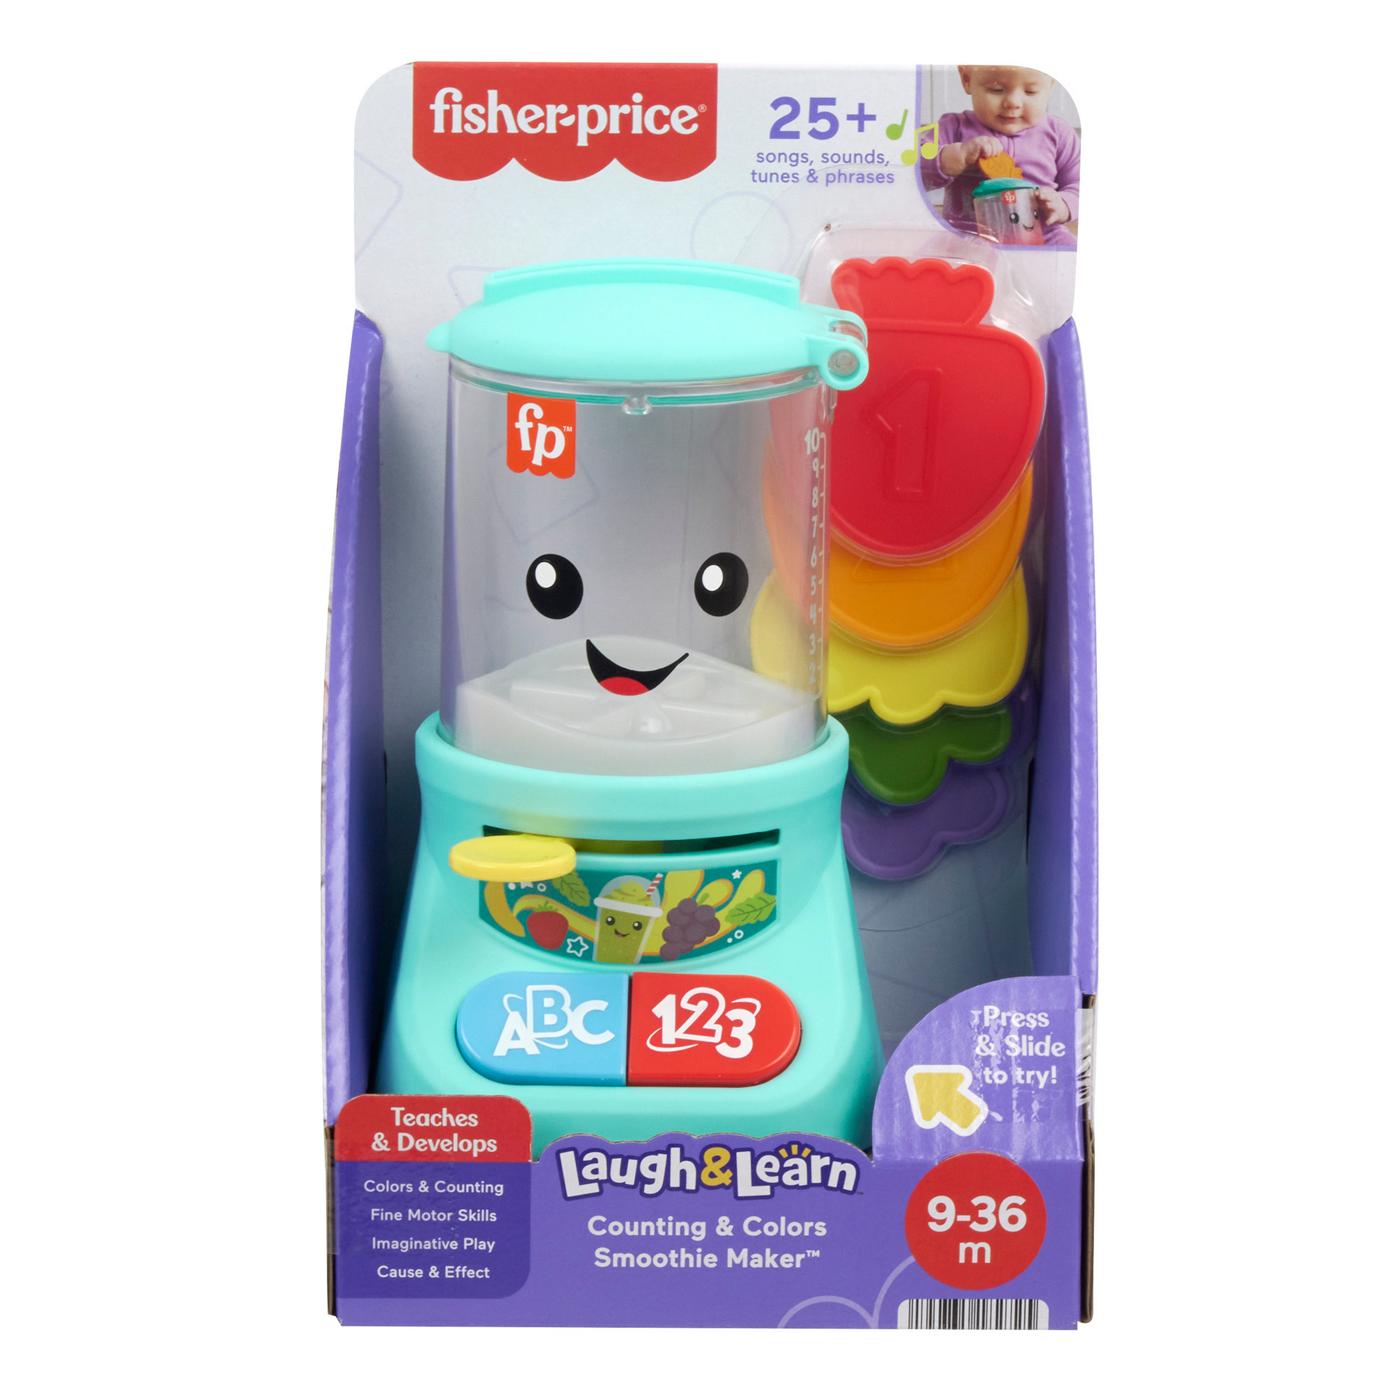 Fisher-Price Laugh & Learn Counting & Colors Smoothie Maker; image 1 of 2